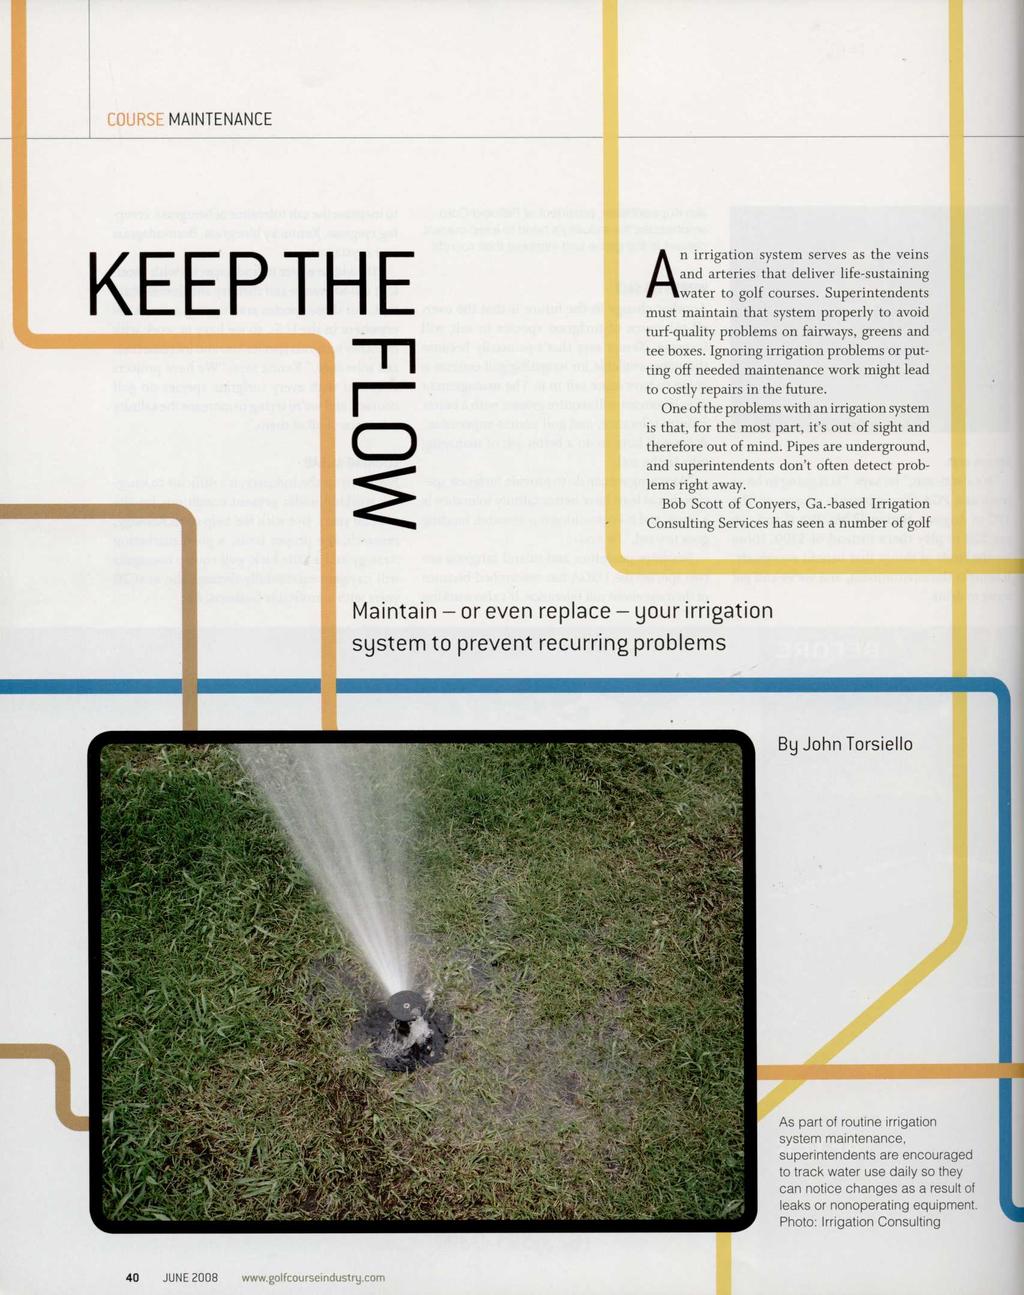 An irrigation system serves as the veins and arteries that deliver life-sustaining water to golf courses.